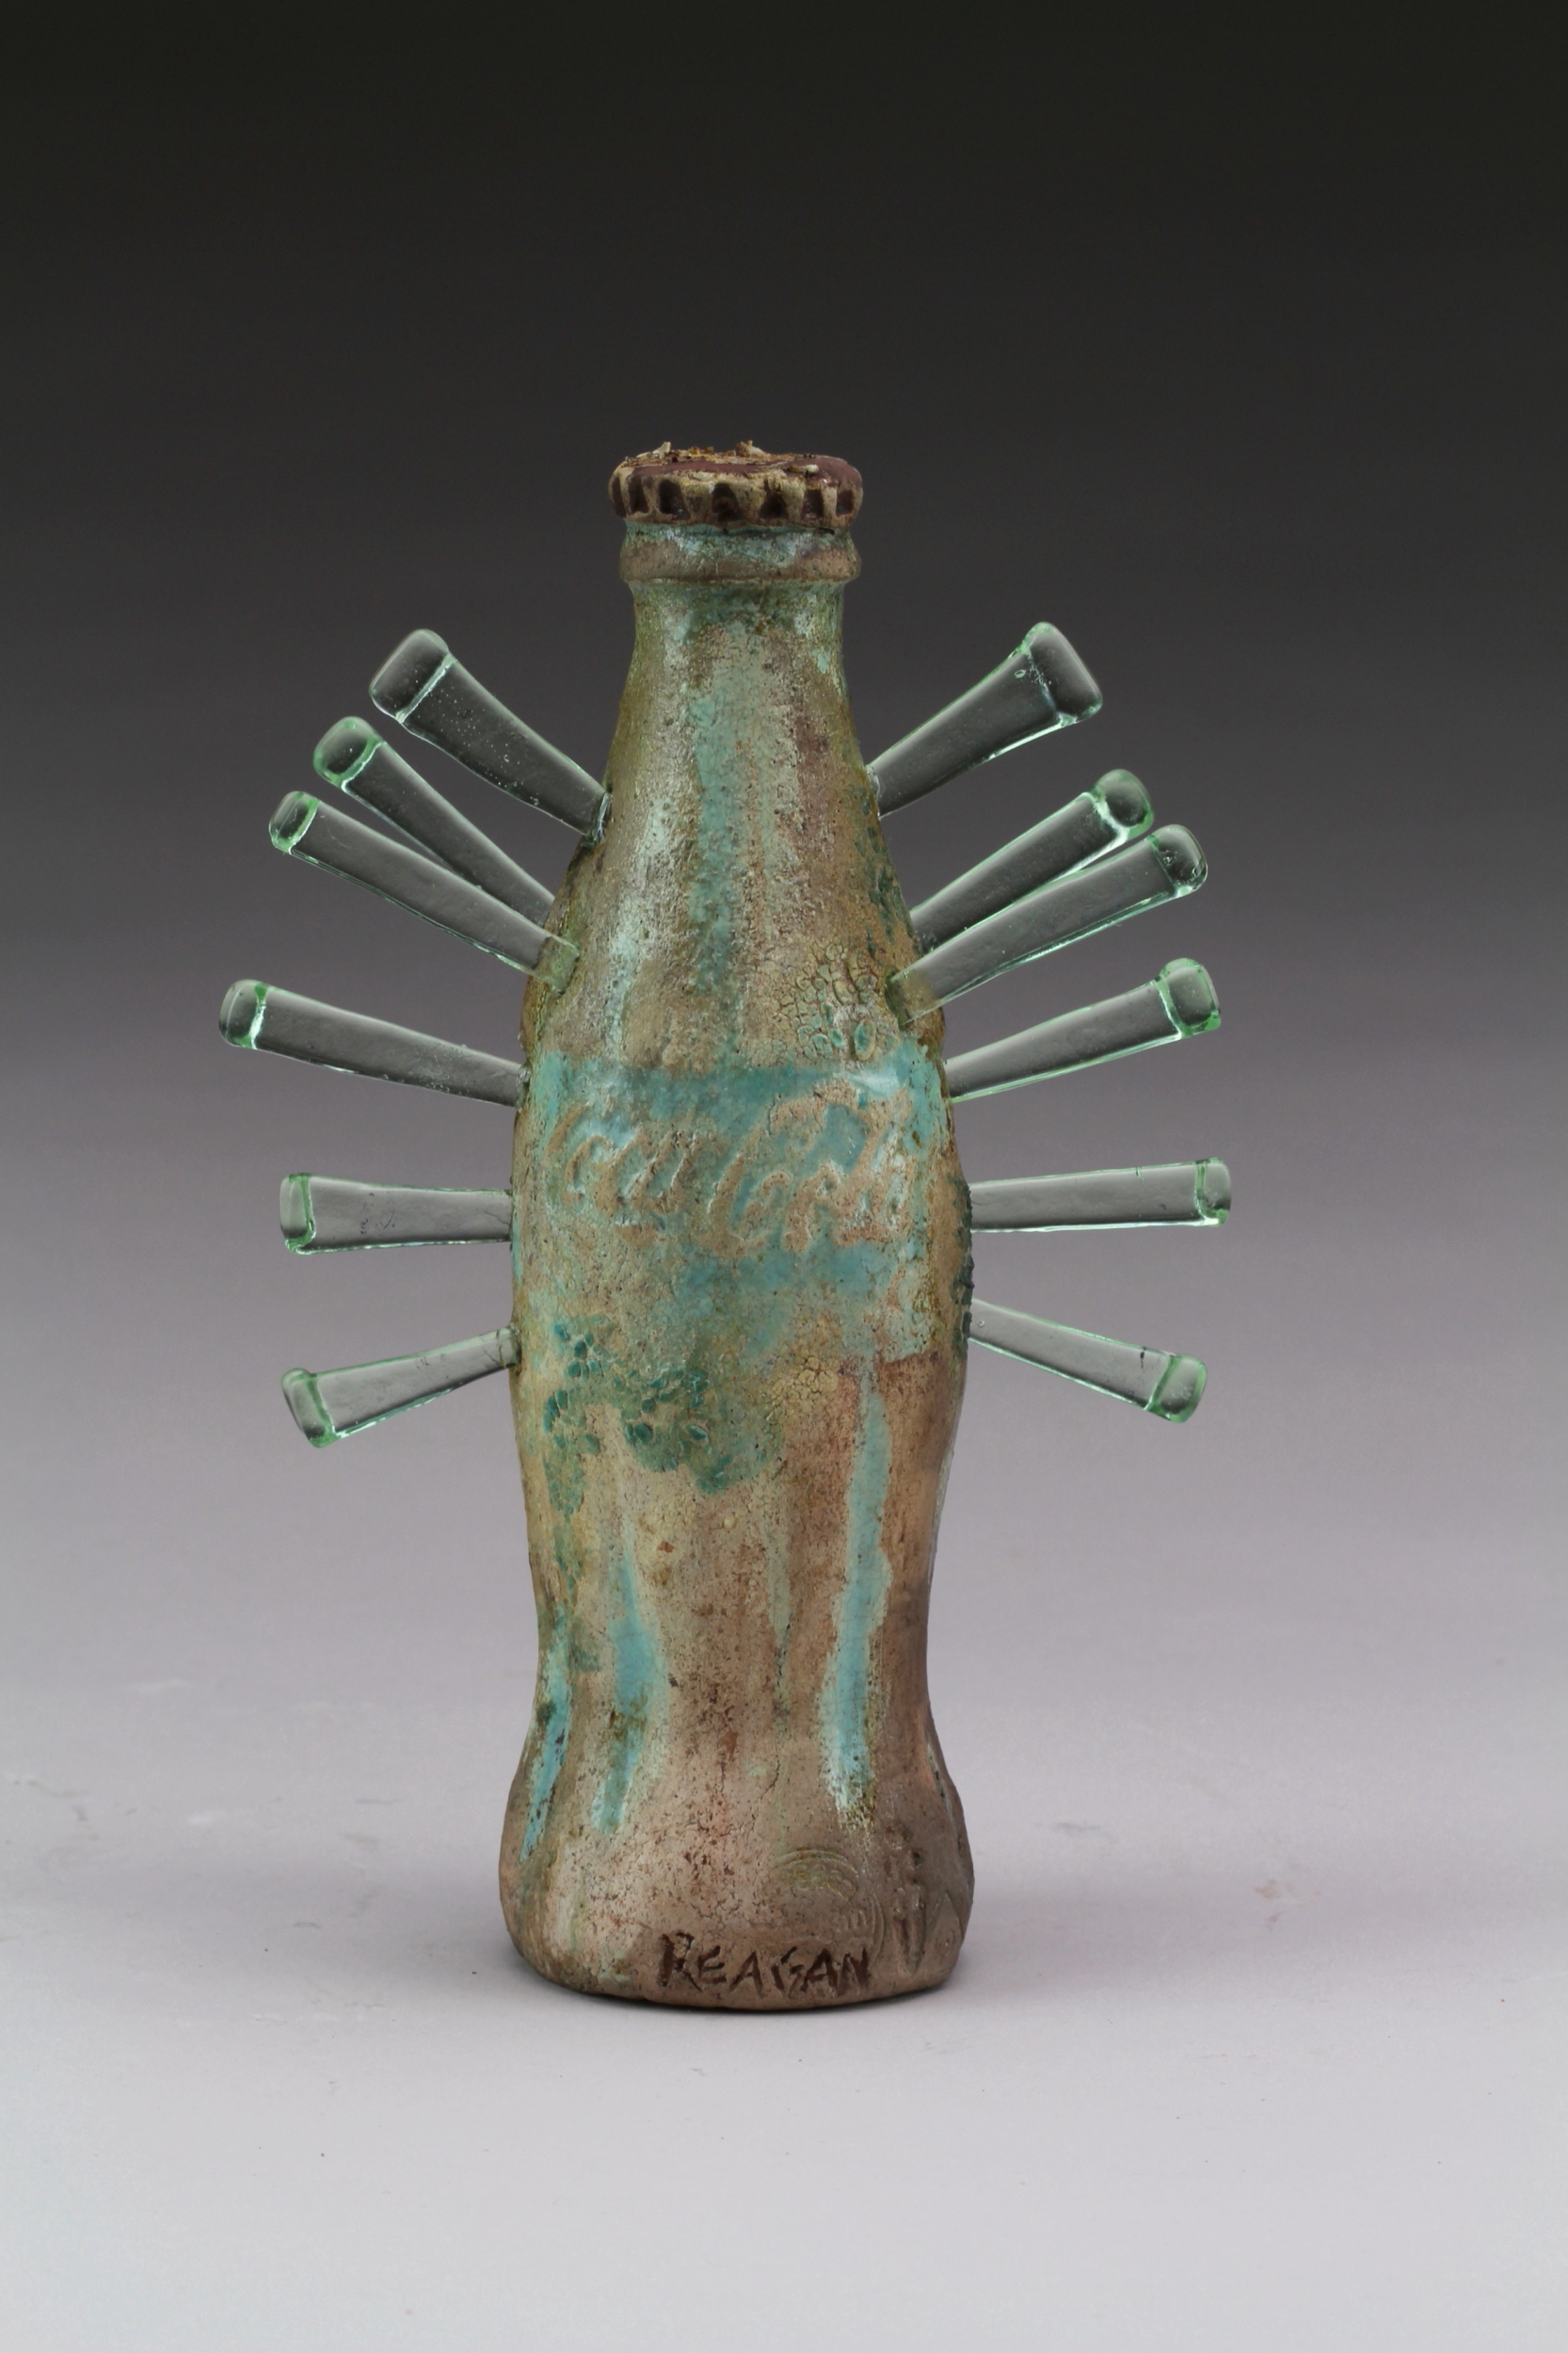 A sculptural ceramic Coke bottle with spikes sticking out the sides. 